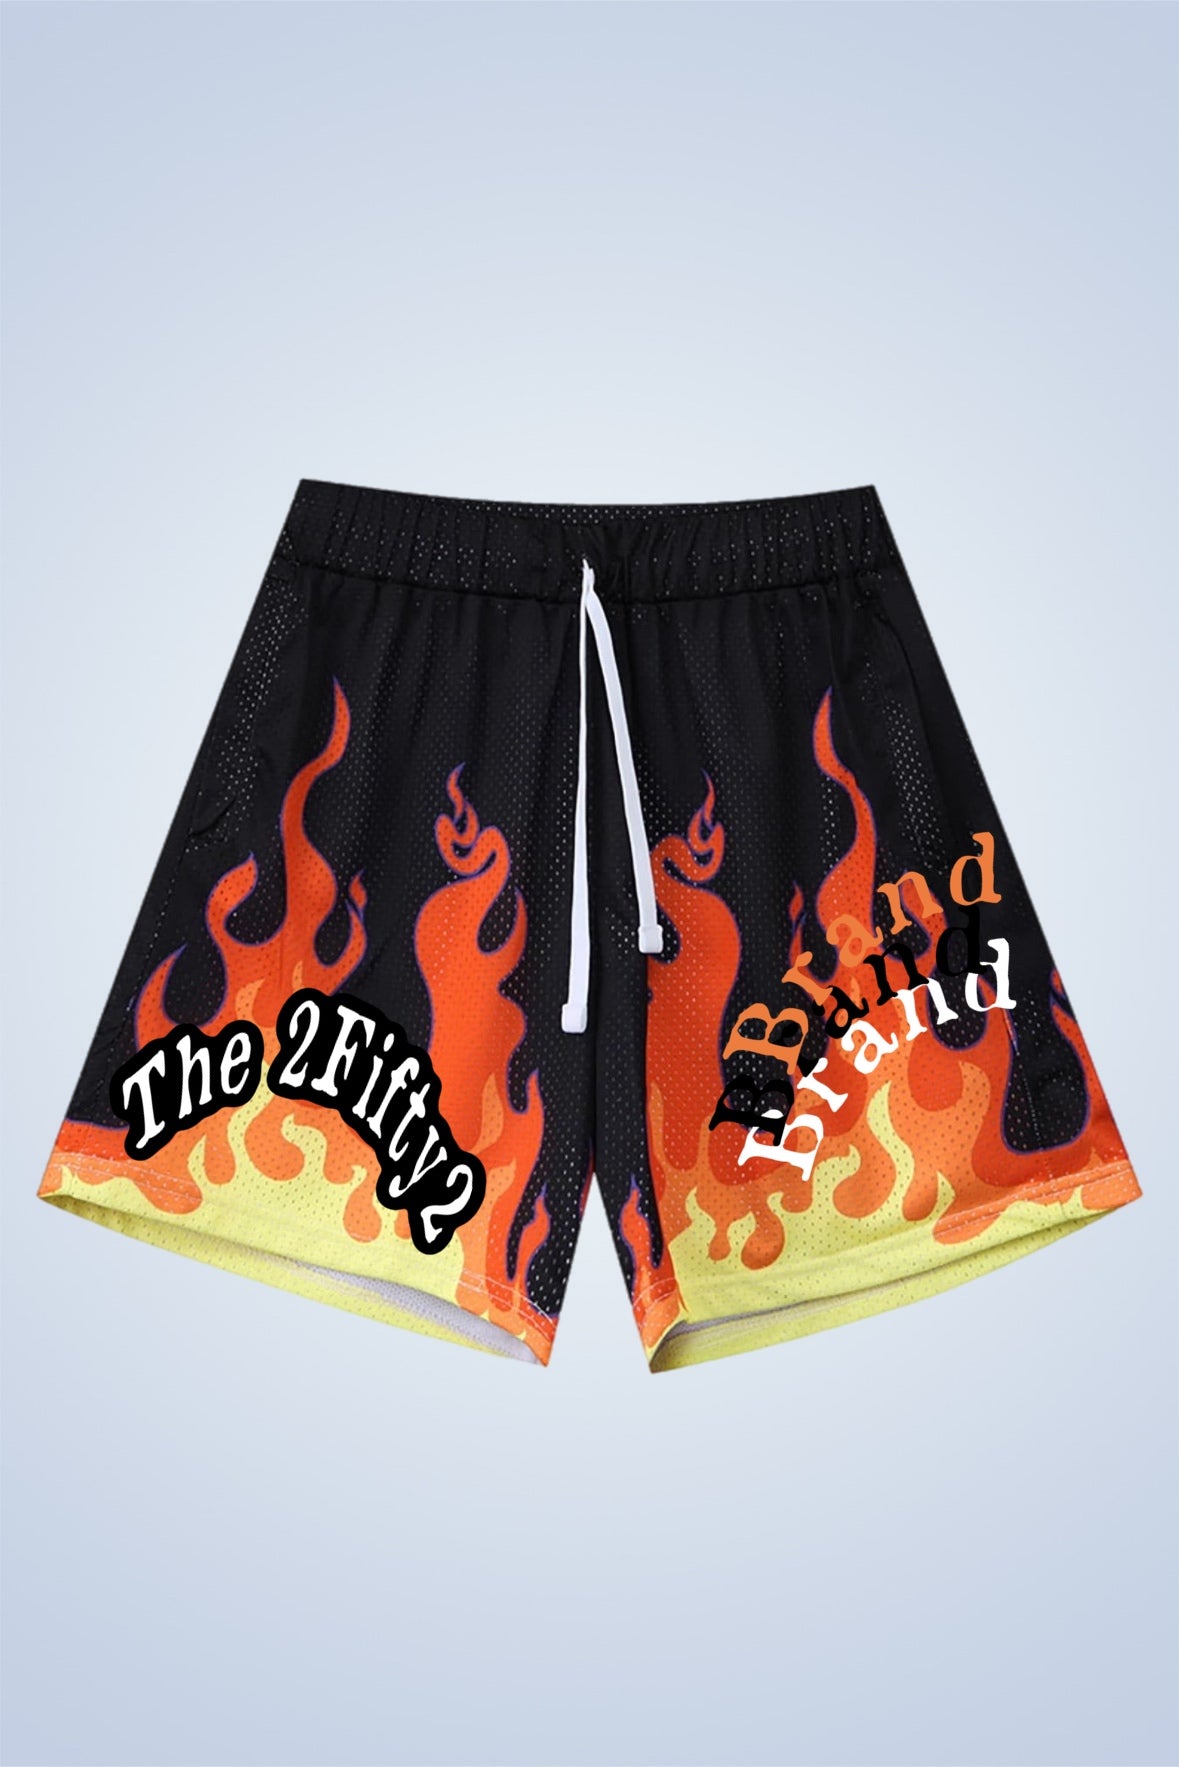 Men’s fire basketball shorts by the 2fifty2 brand